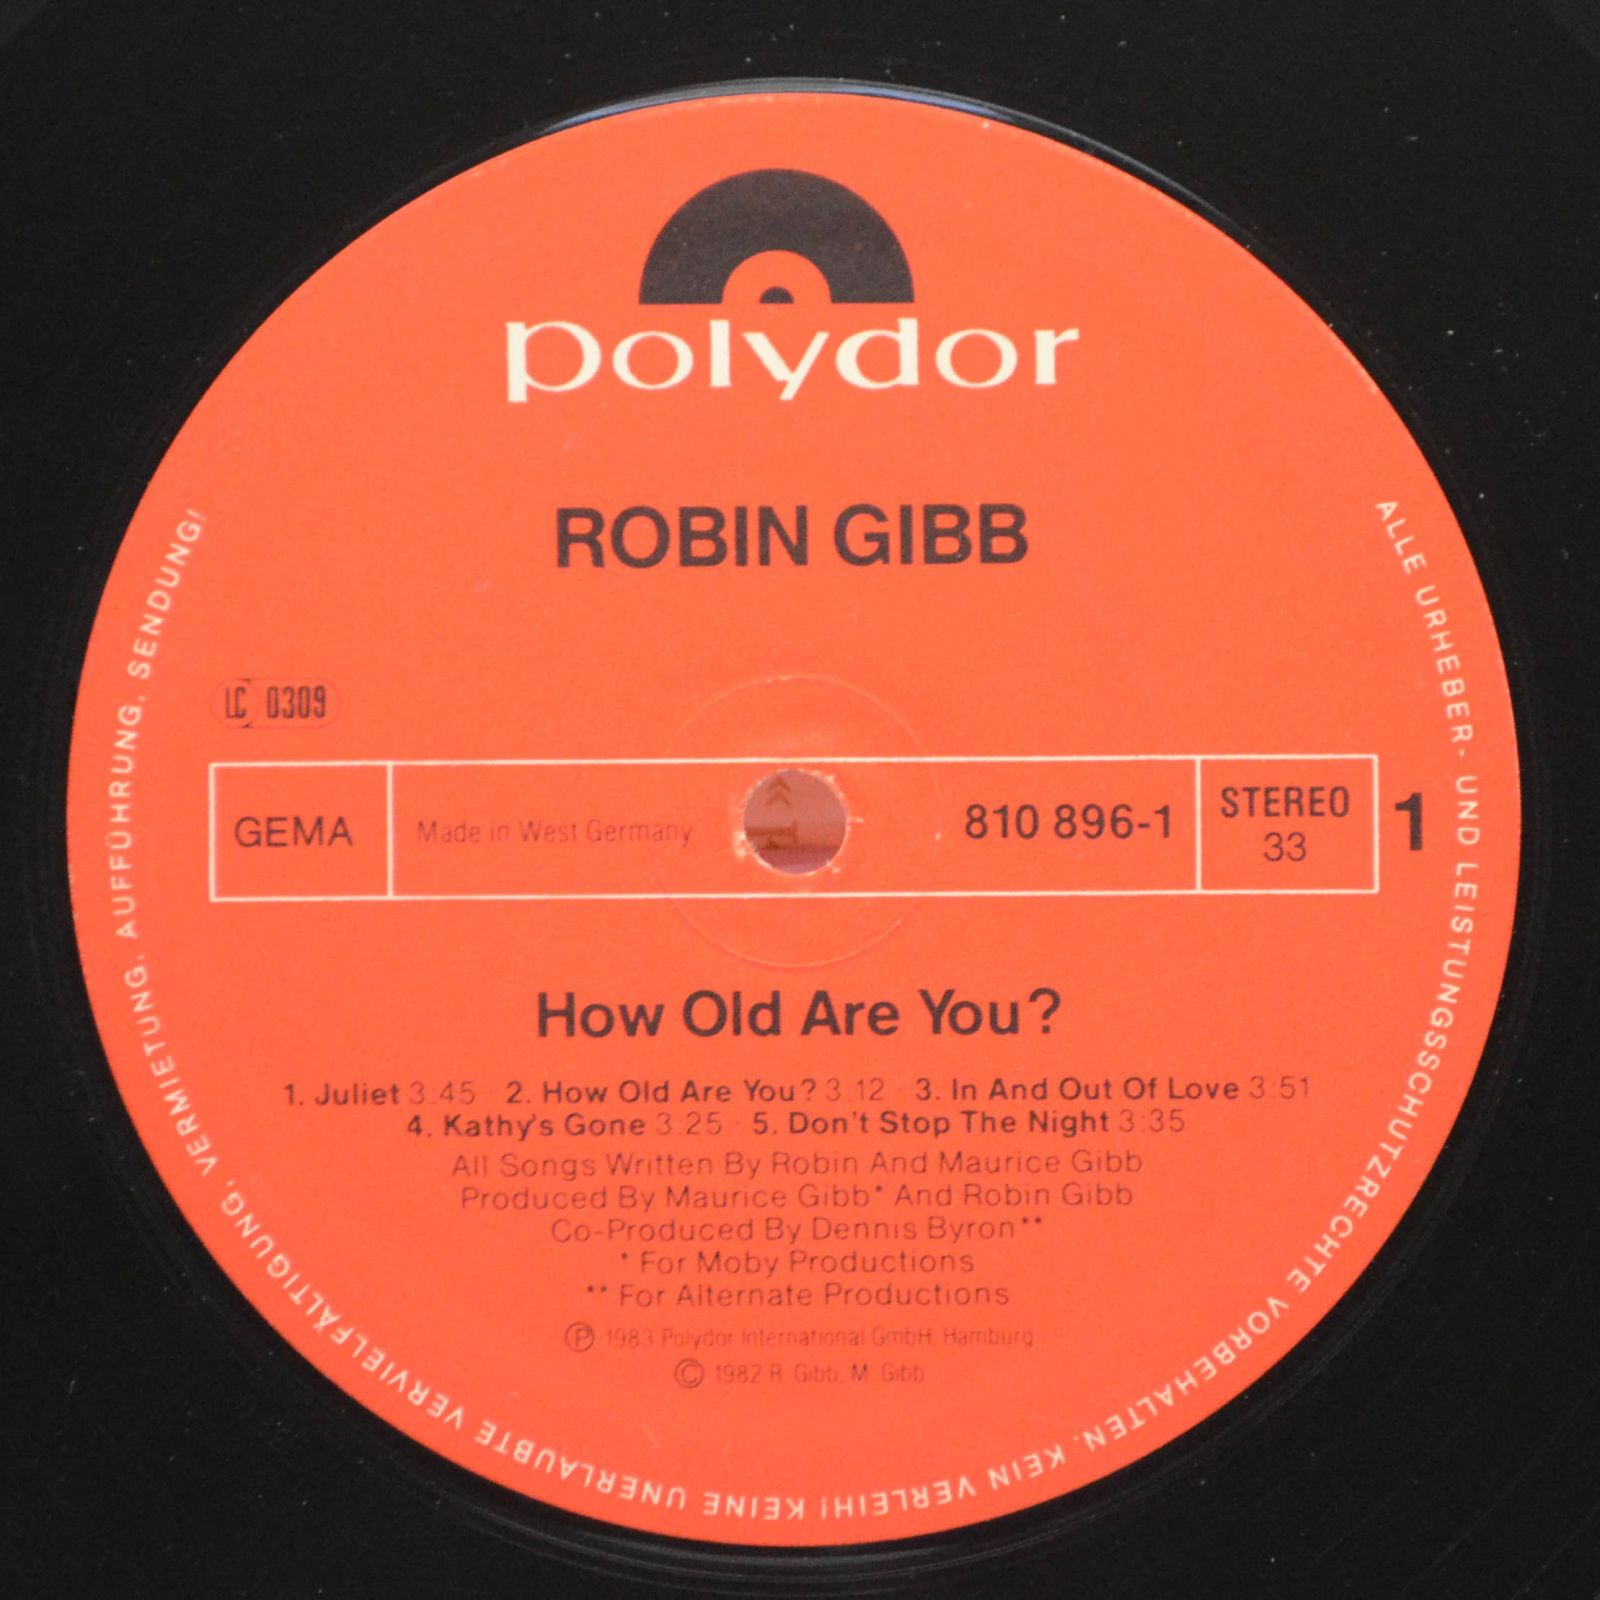 Robin Gibb — How Old Are You?, 1983